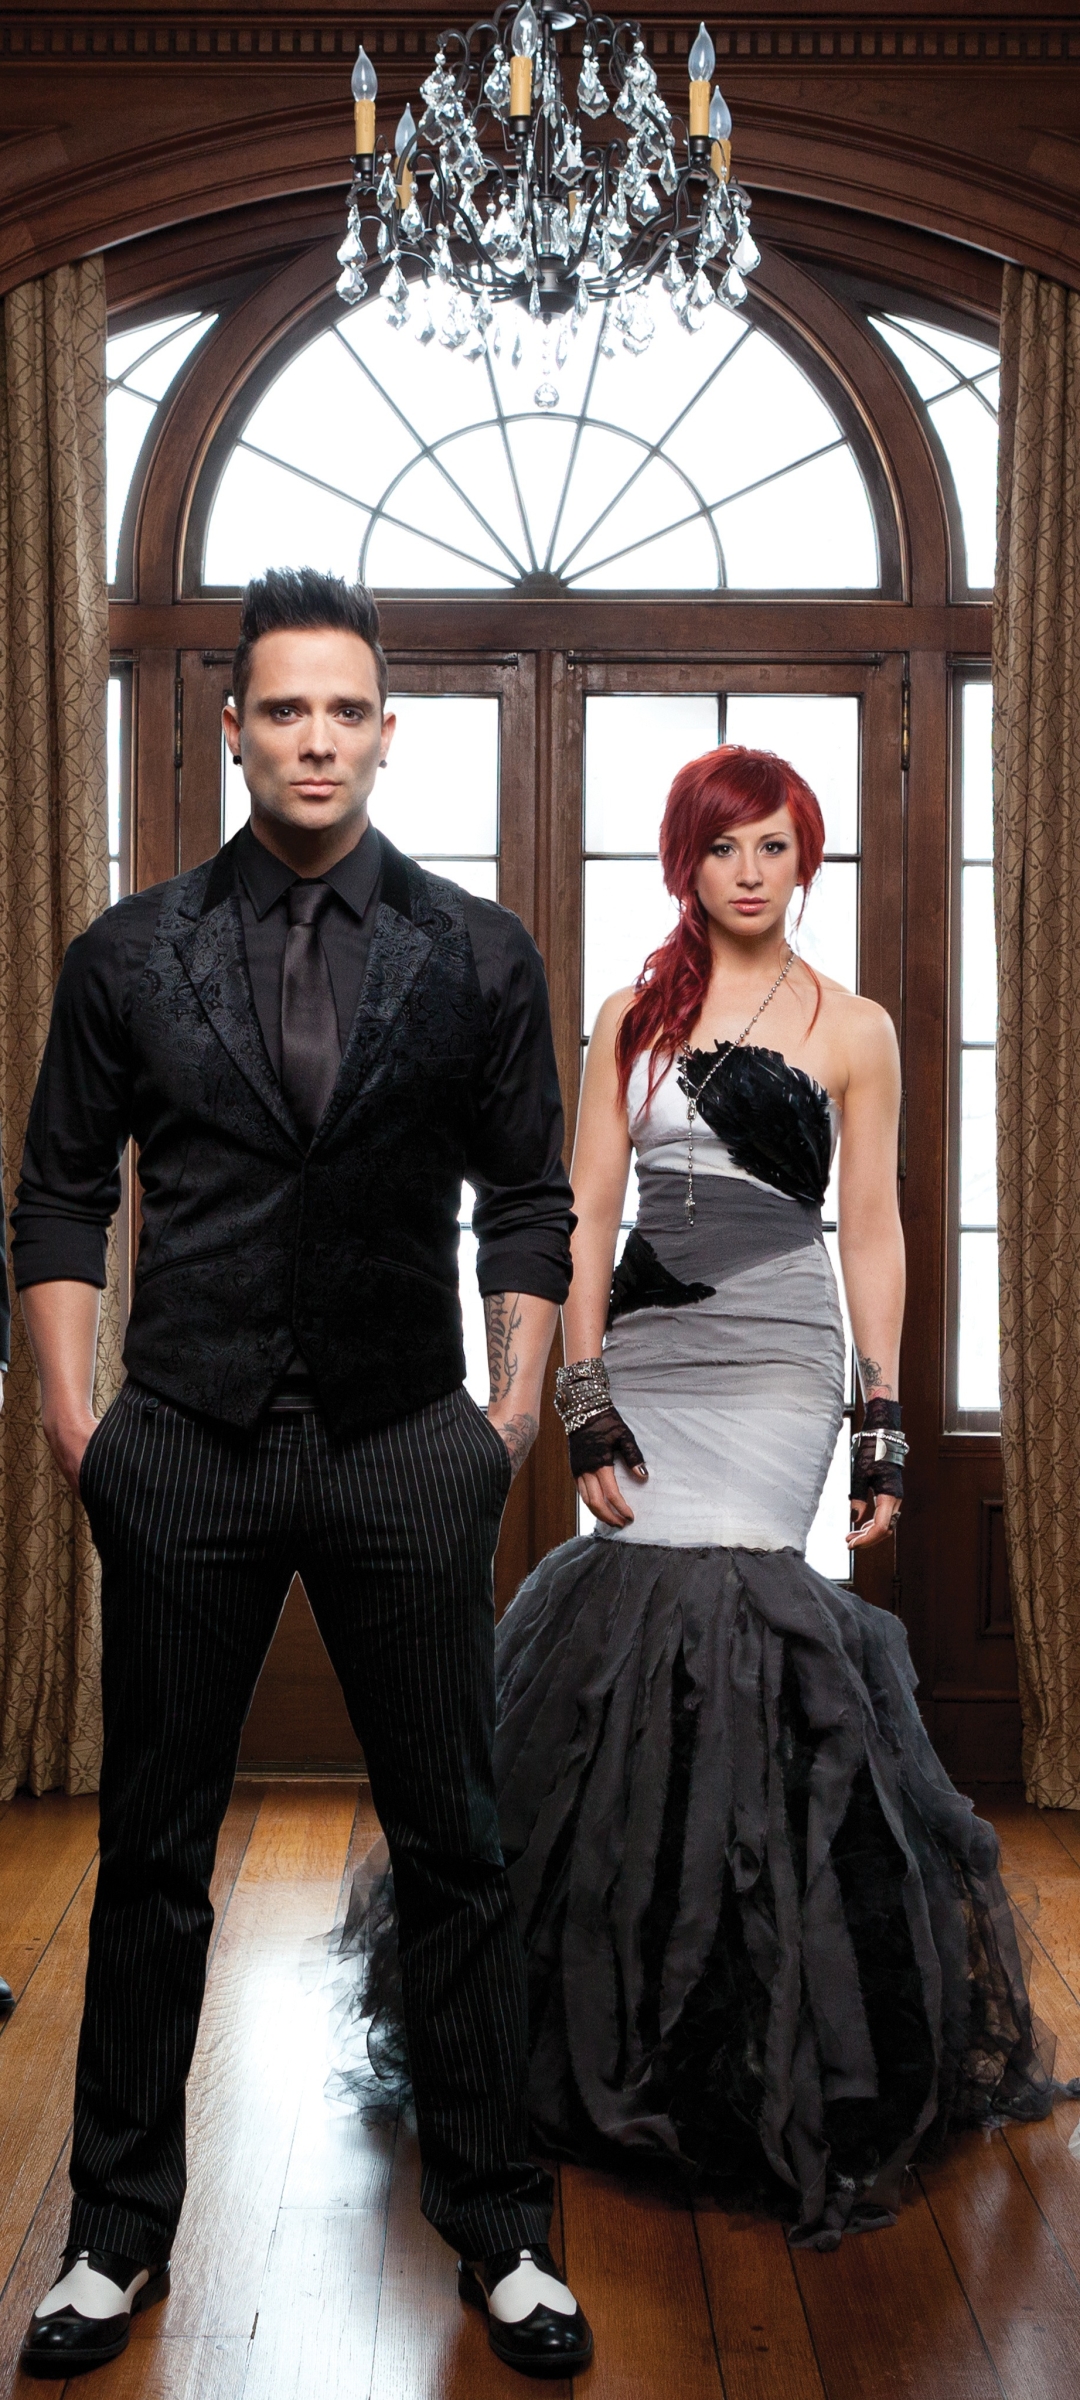 Skillet the band